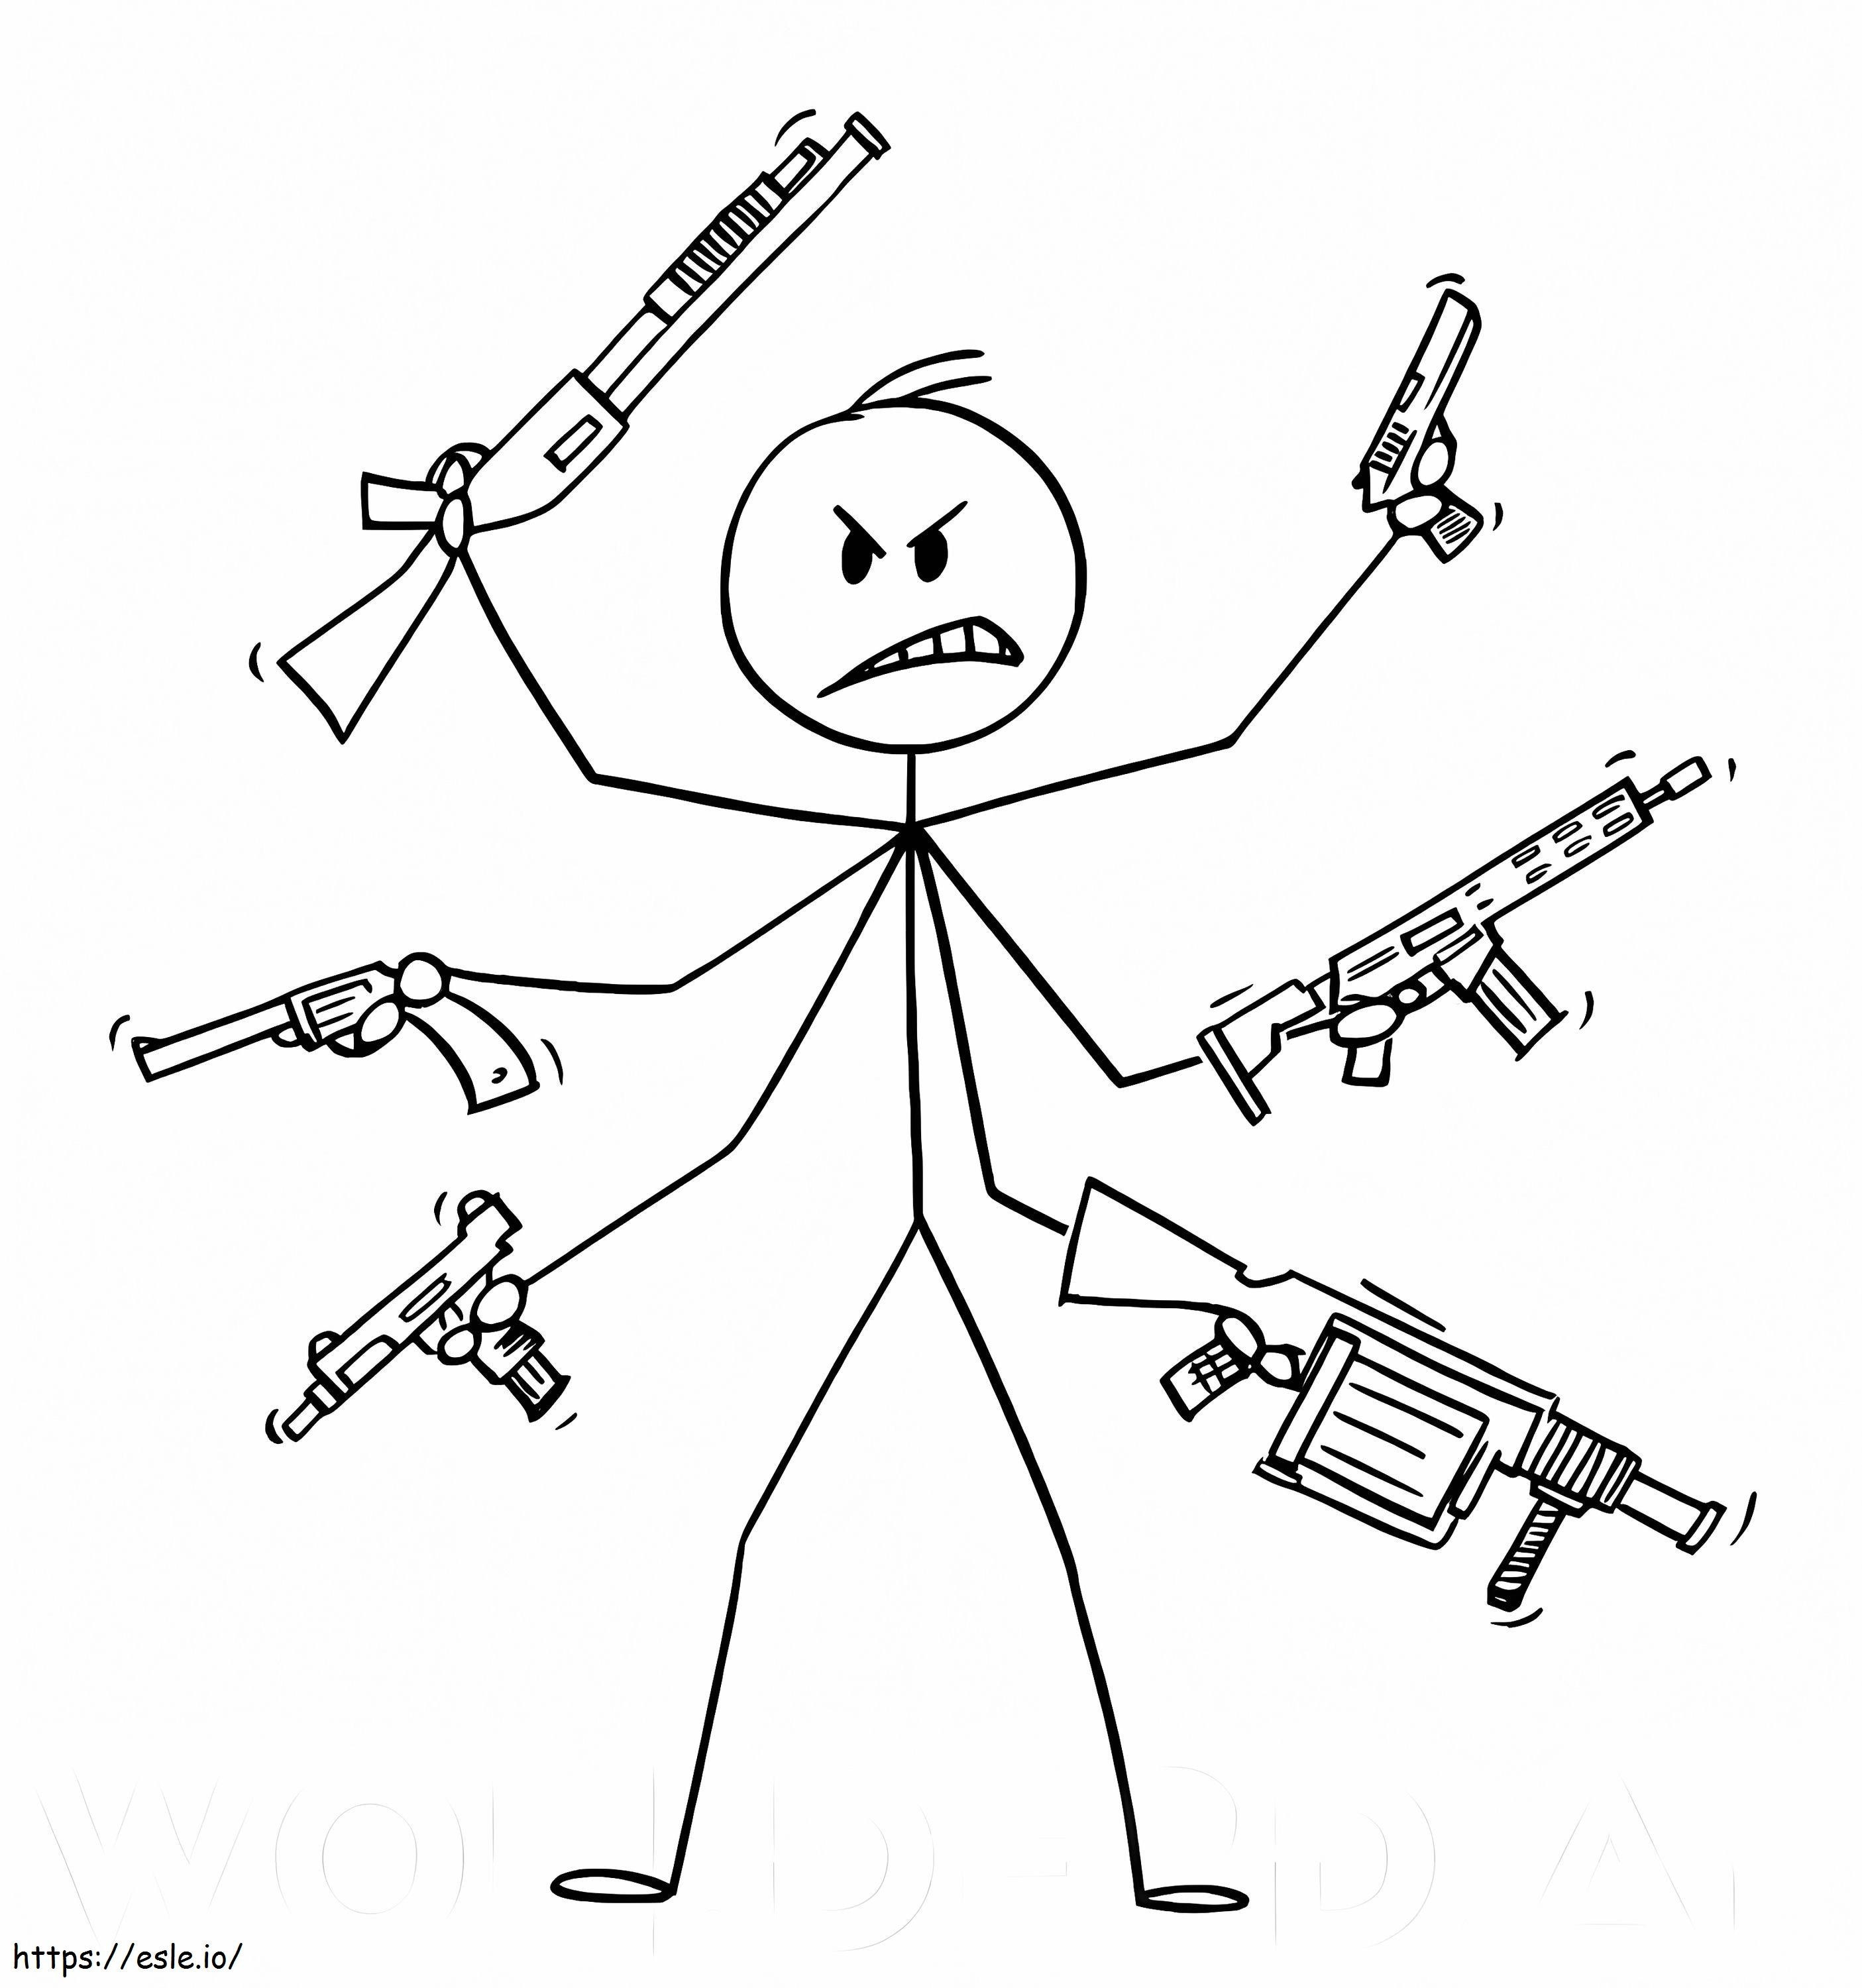 Stickman With Weapons coloring page